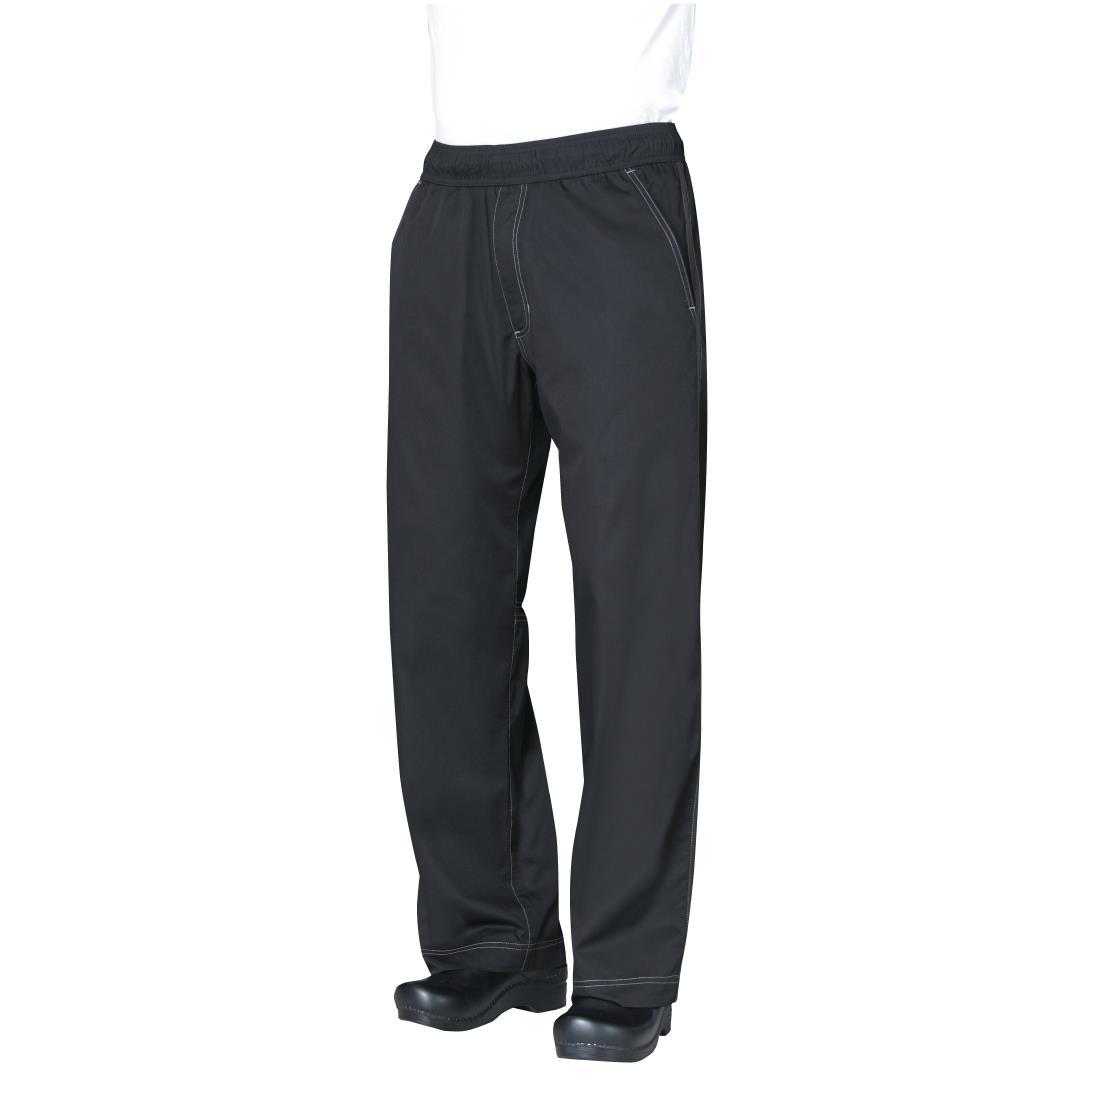 Chef Works Unisex Cool Vent Baggy Chefs Trousers Black XL - B187-XL  - 1